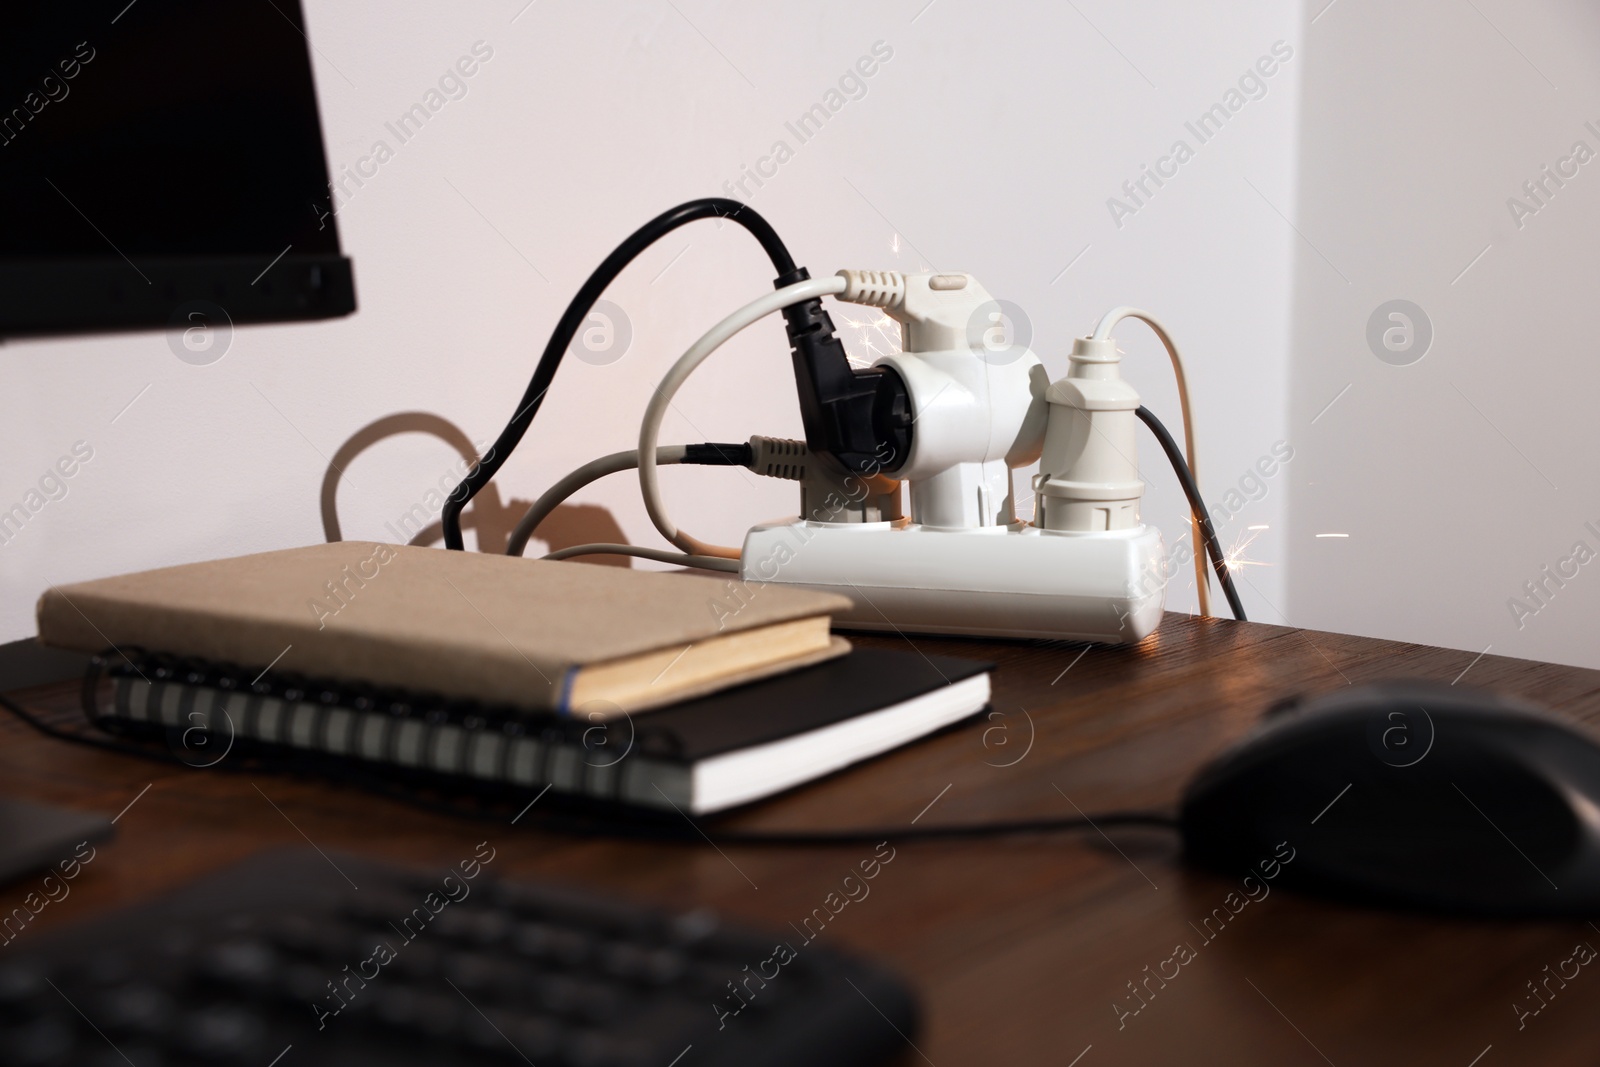 Photo of Inflamed plug in power strip indoors on wooden table. Electrical short circuit